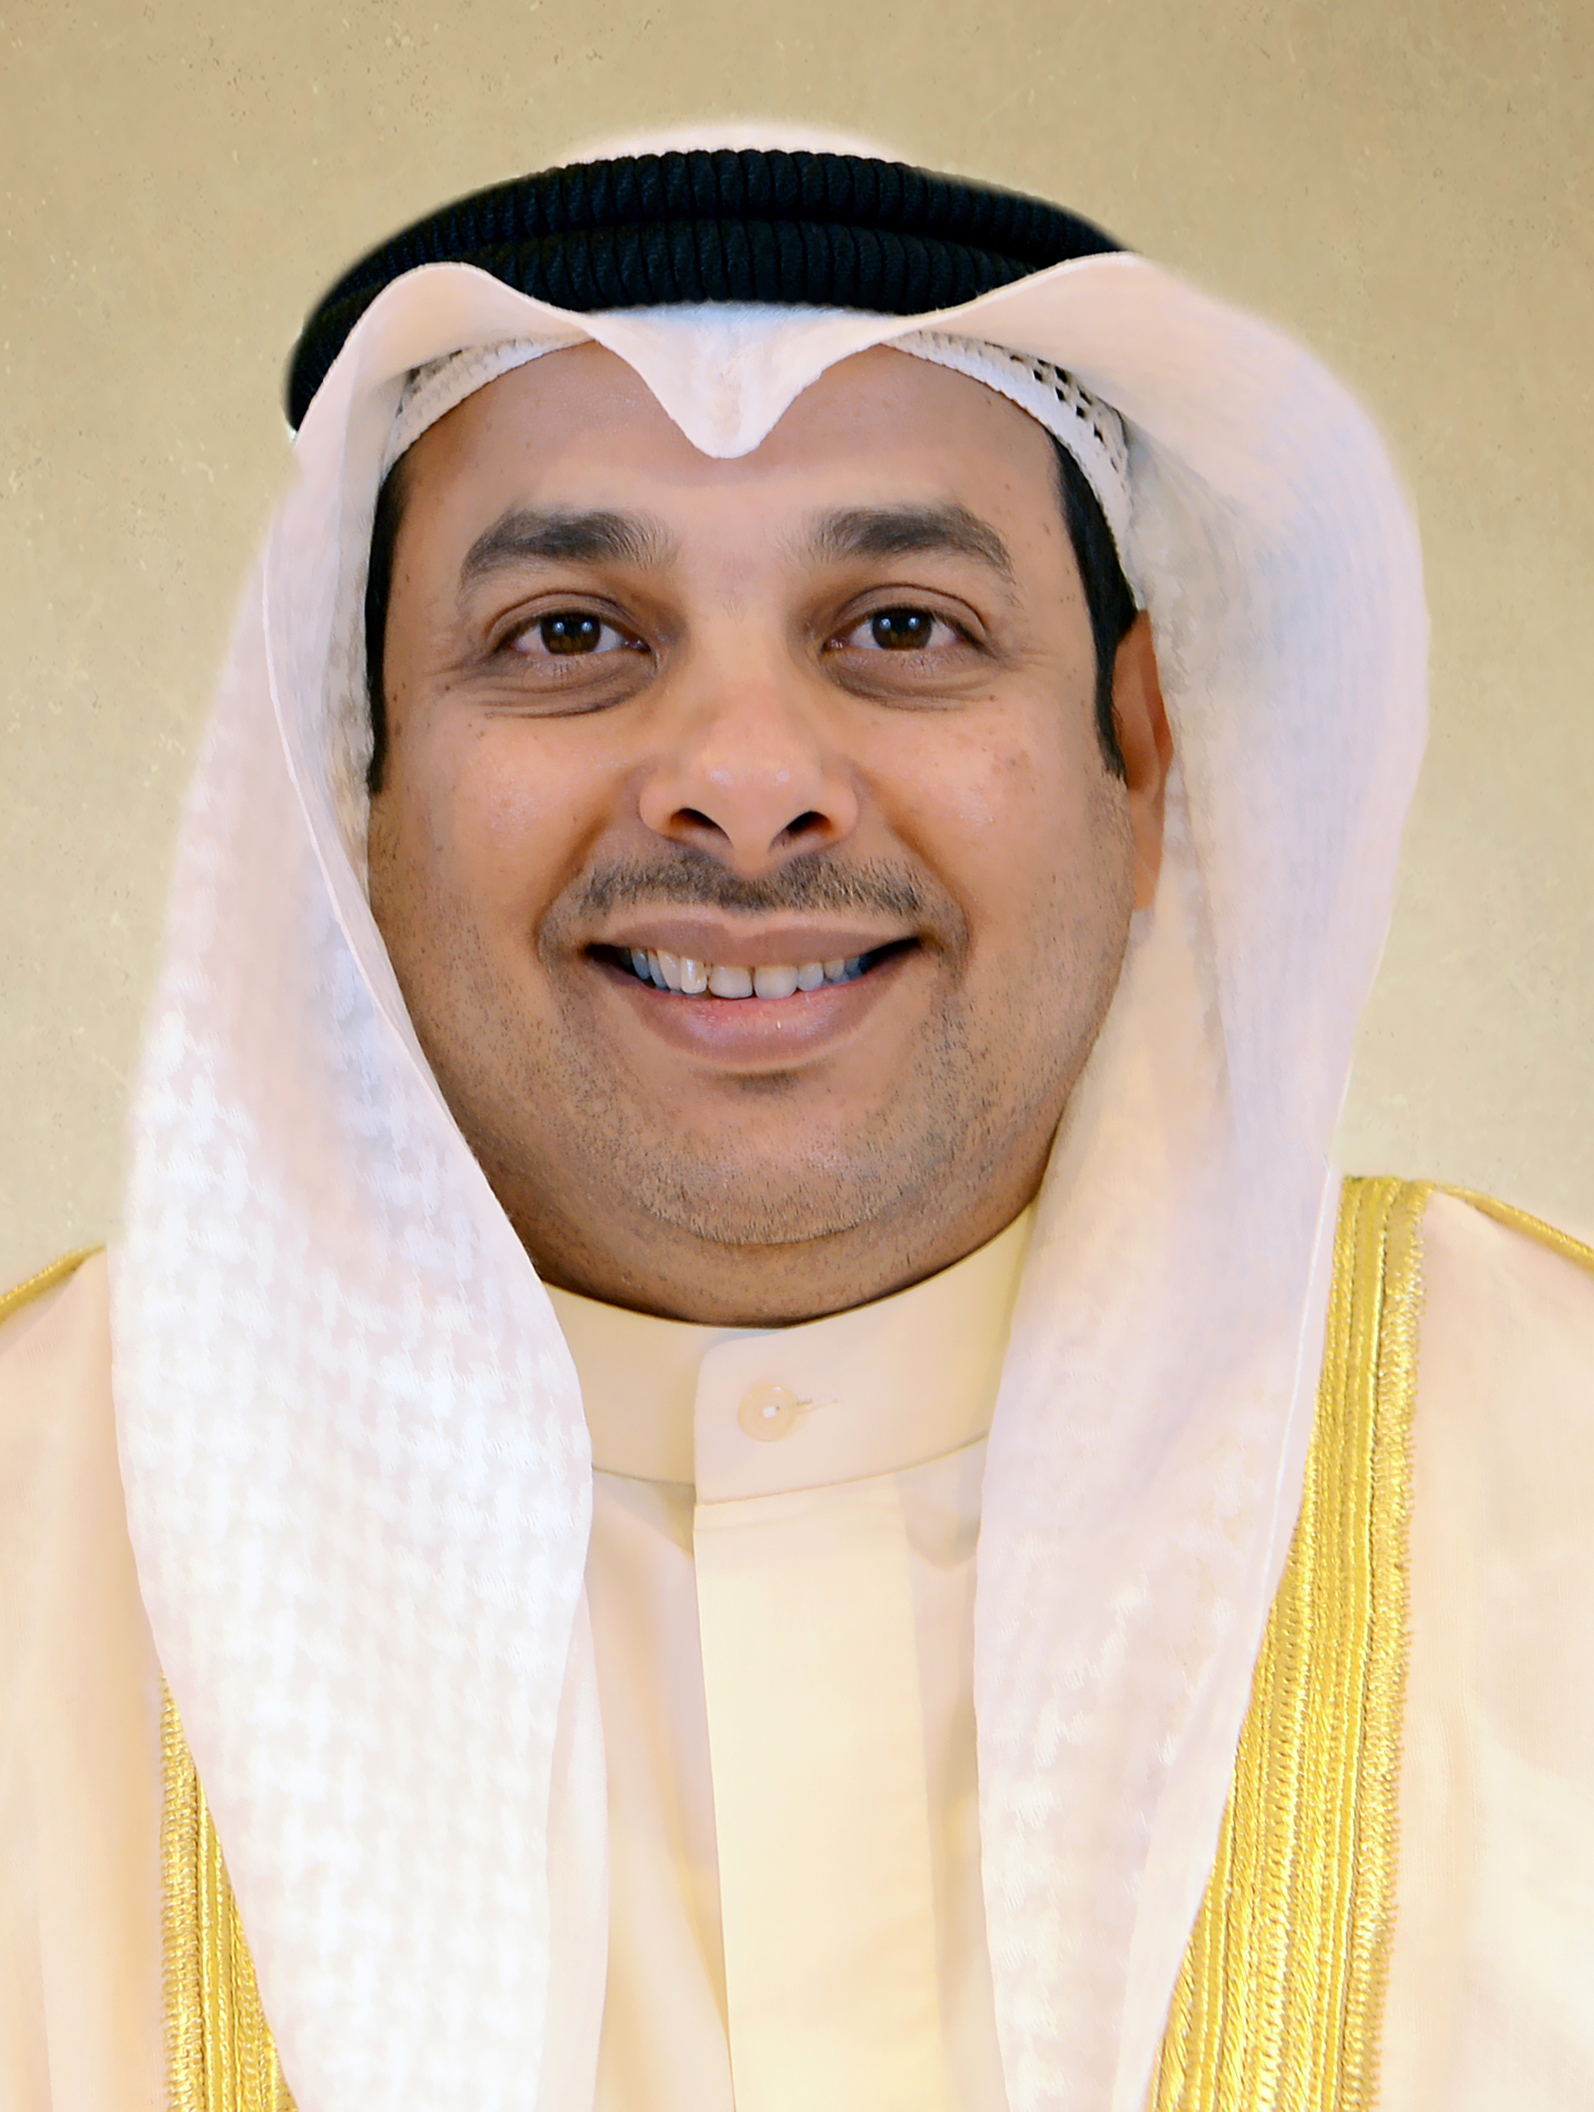 Minister of Justice and Minister of Awqaf and Islamic Affairs Yaaqoub Al-Sanea